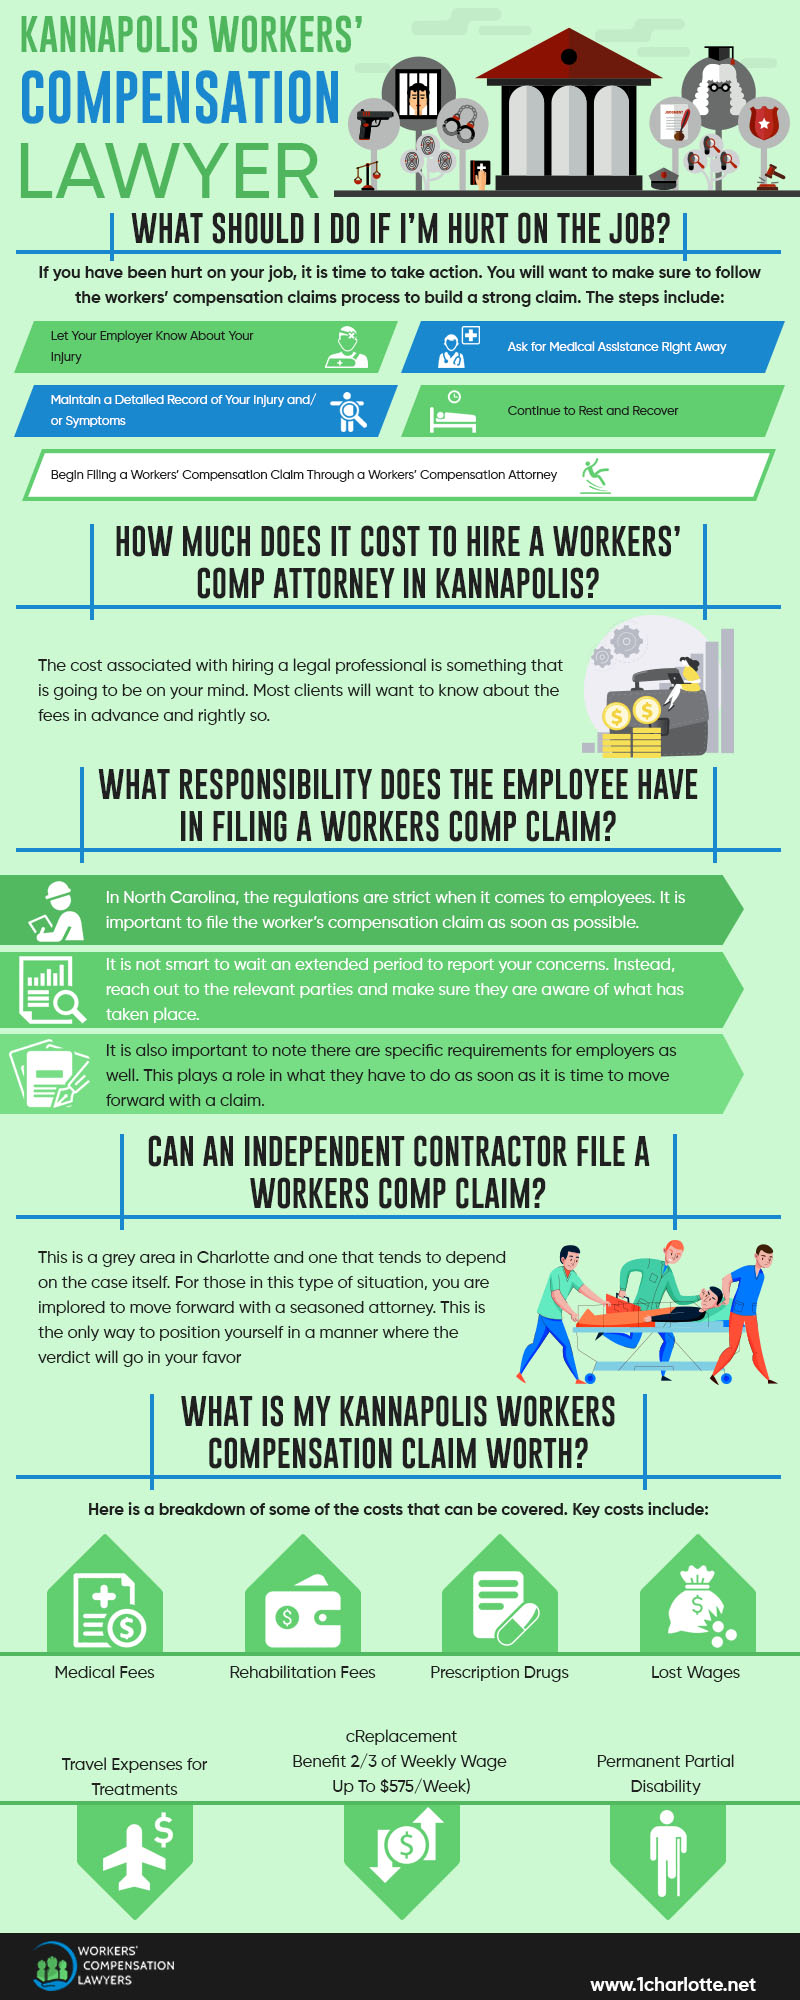 Kannapolis Workers Compensation Infographic